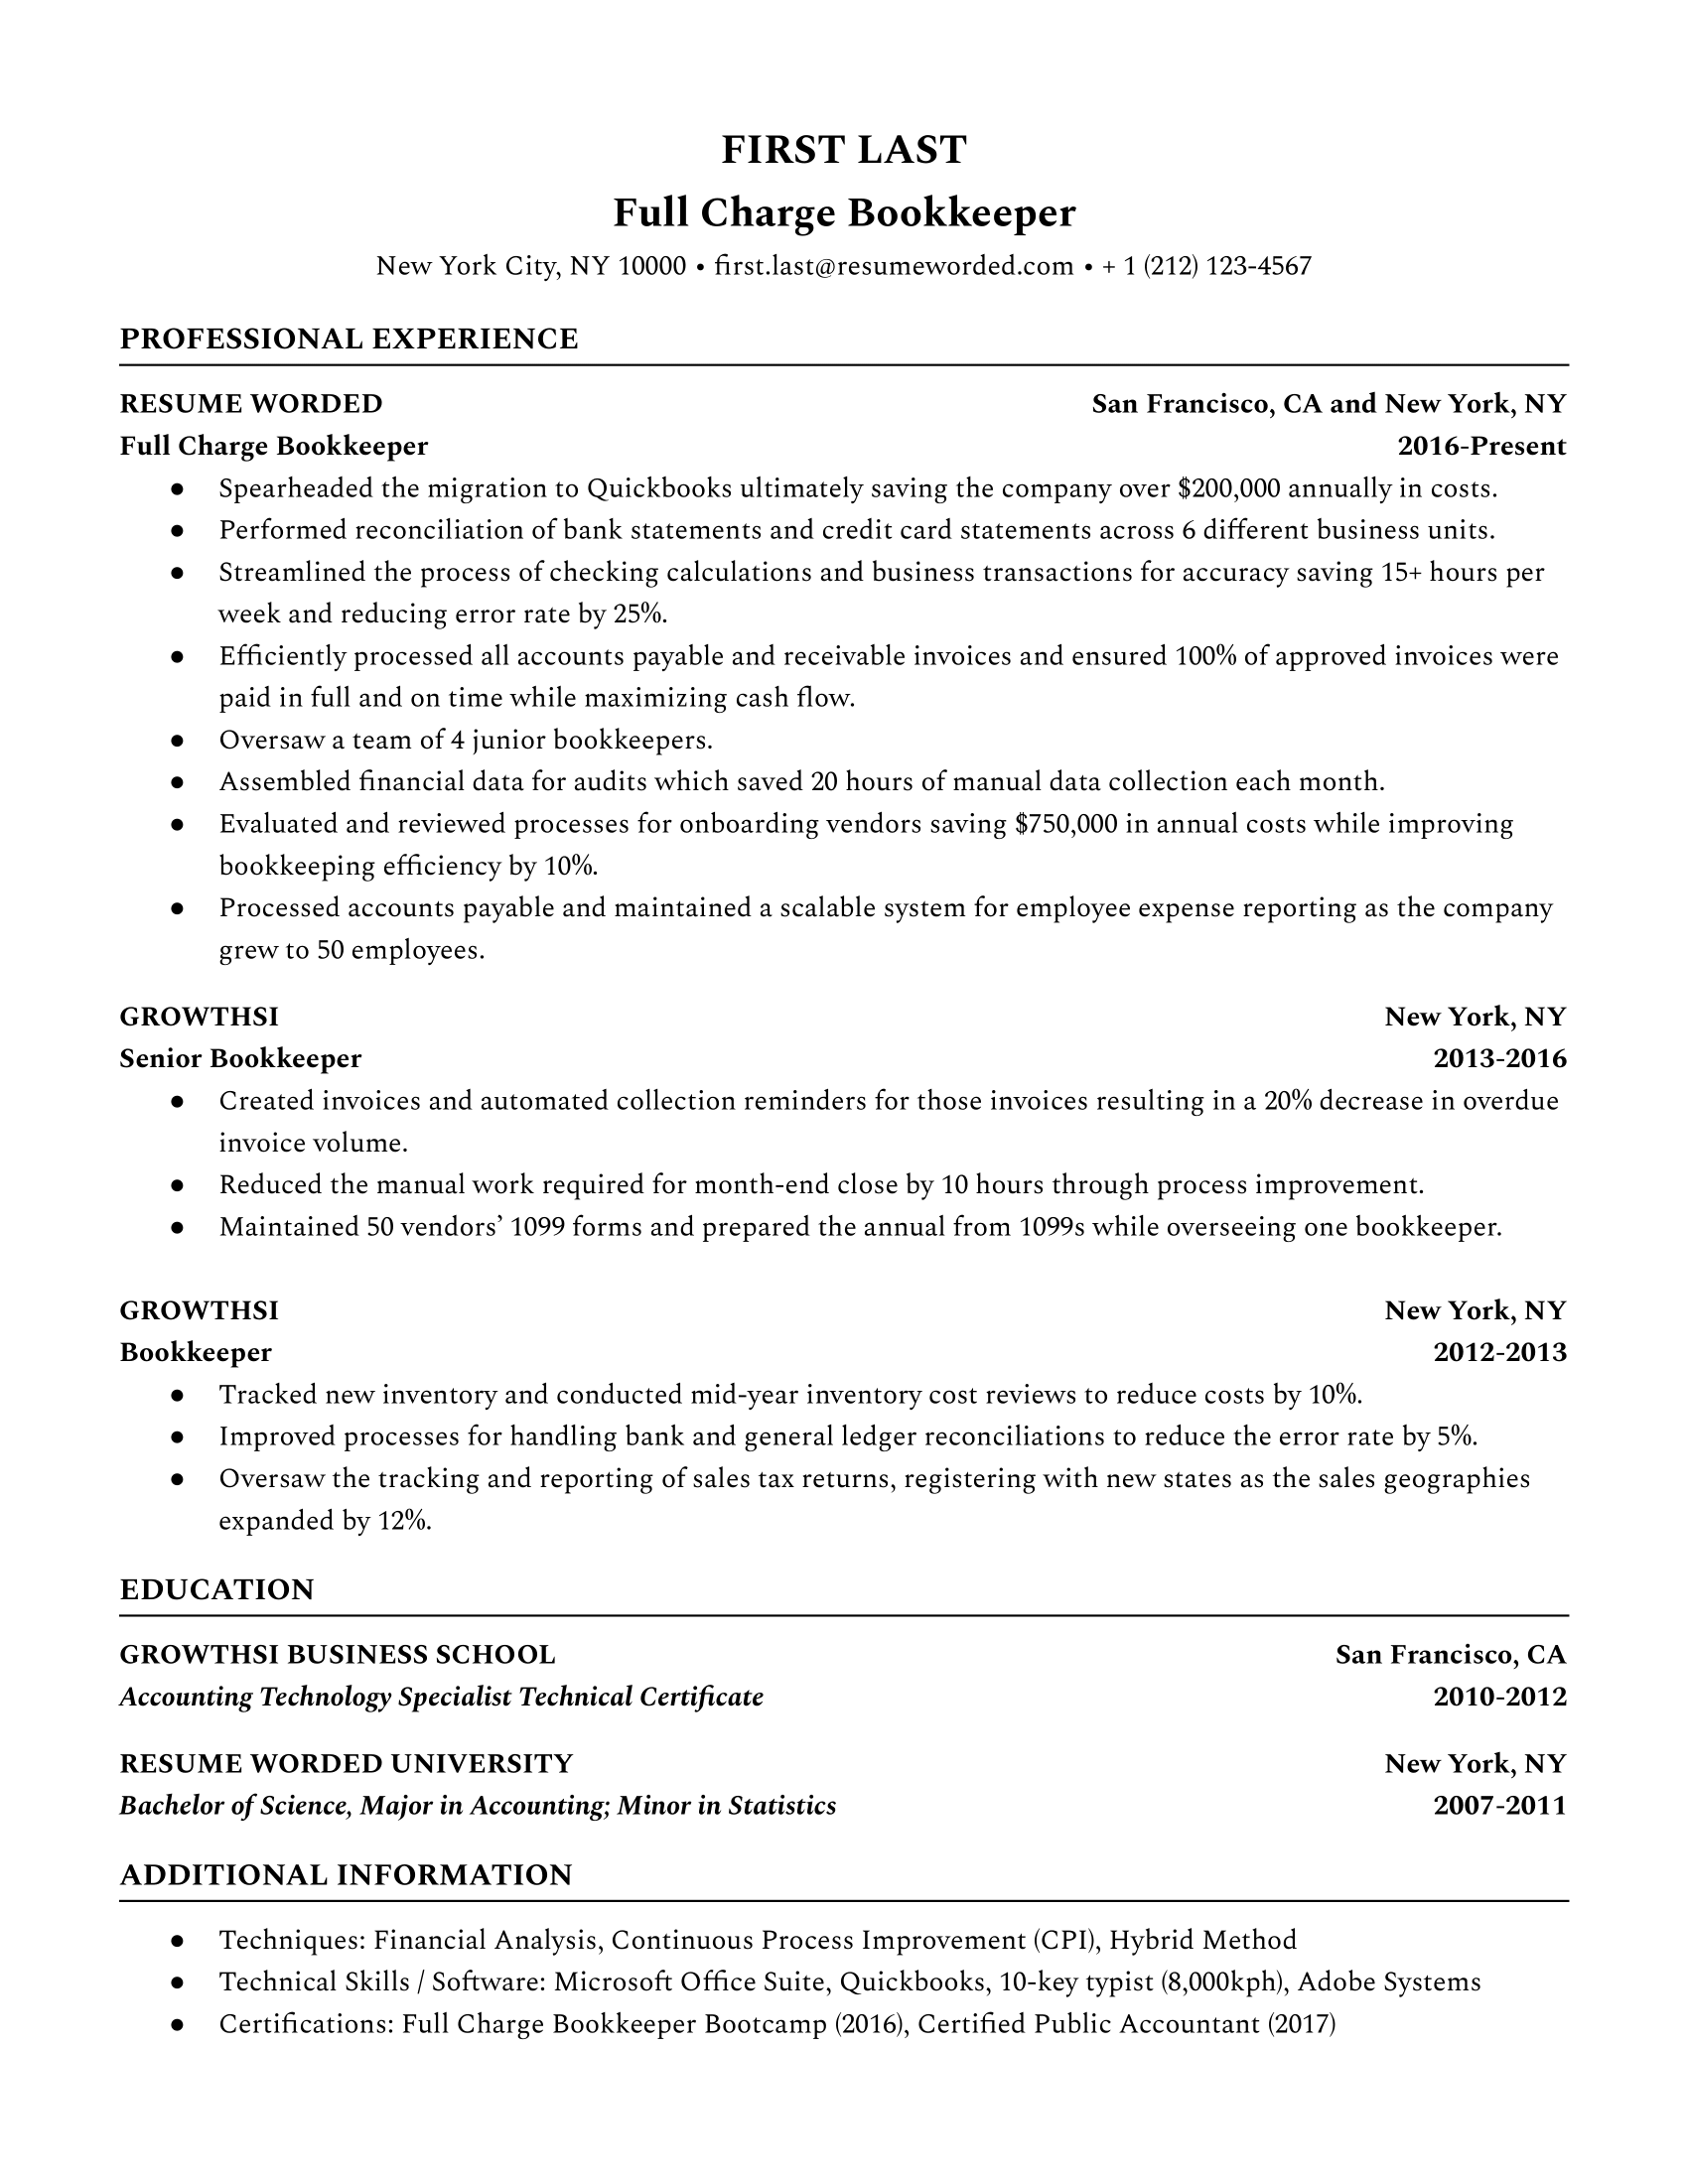 A clean and concise CV of a Full Charge Bookkeeper showcasing key skills, software proficiency, and relevant certifications.